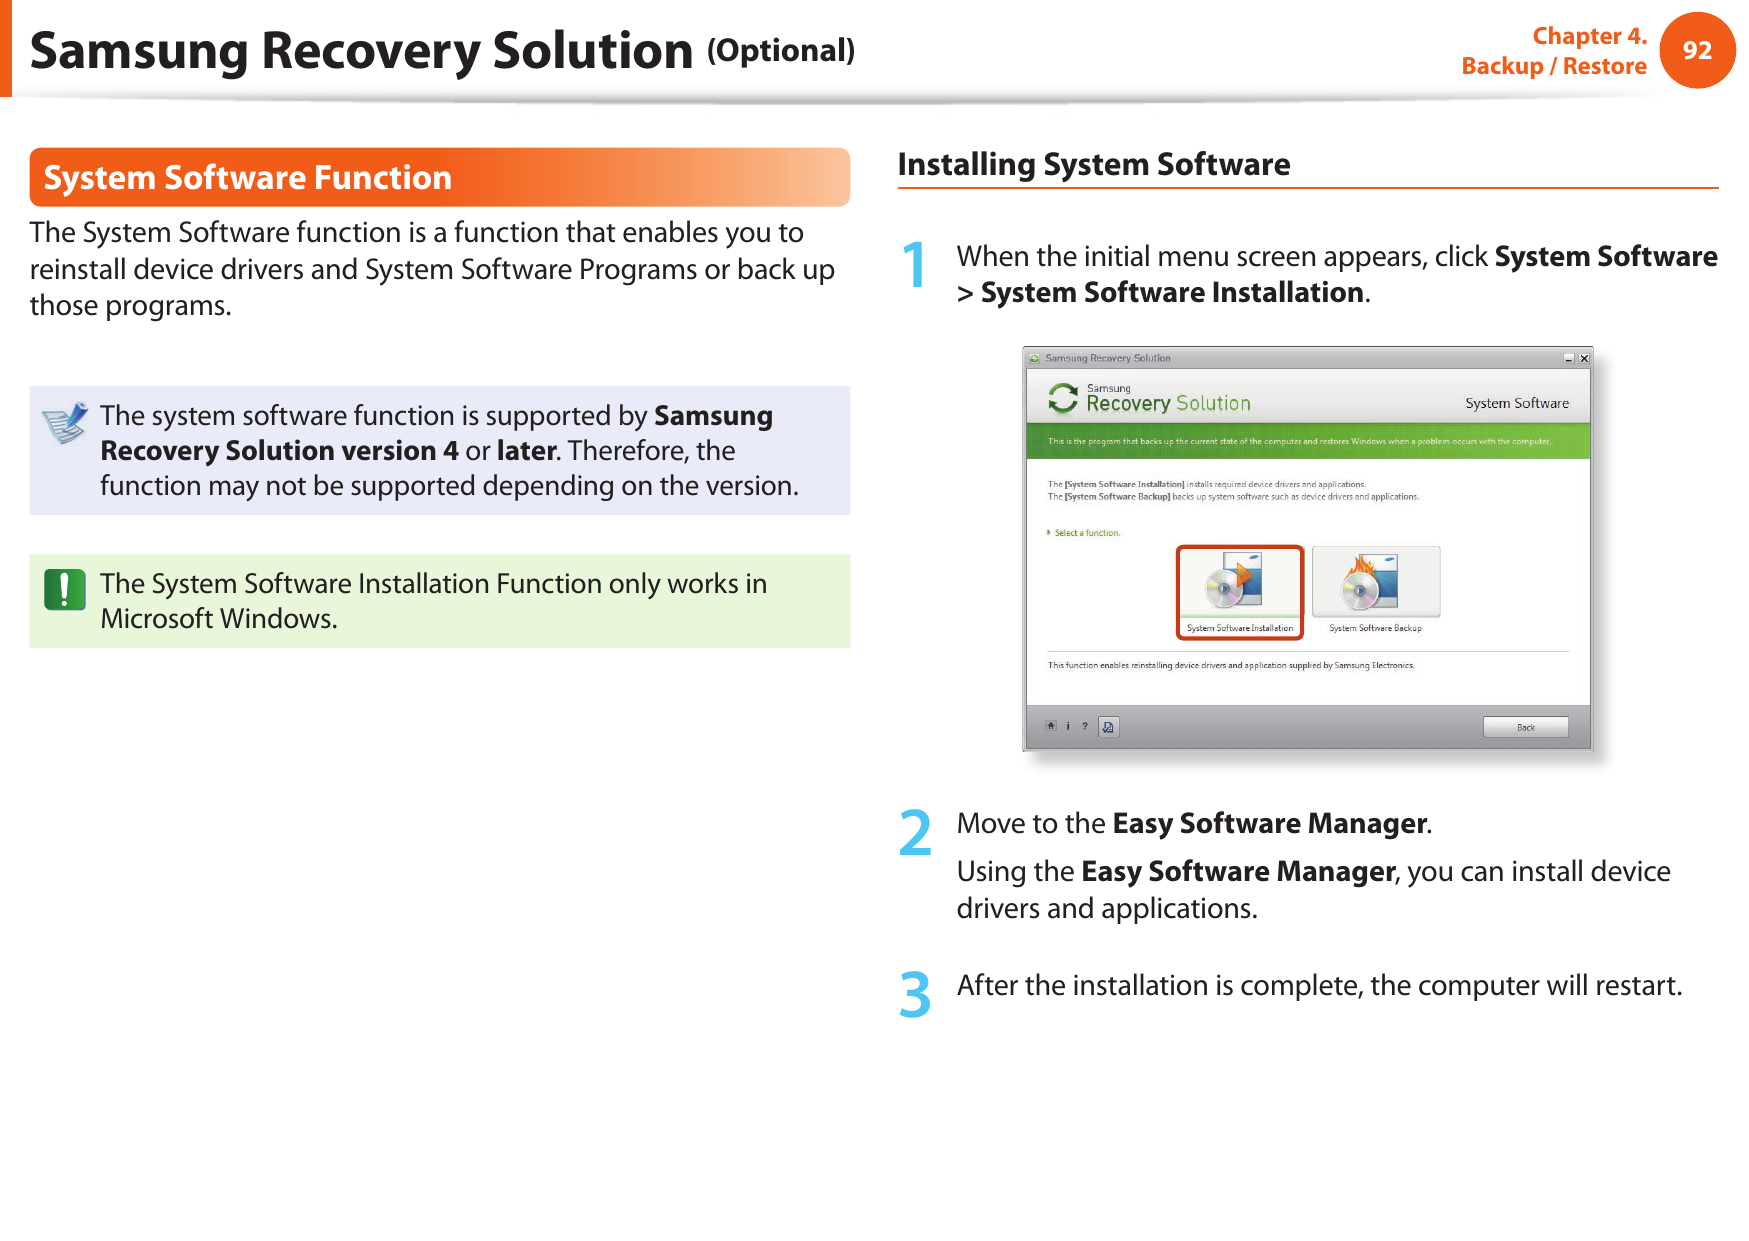 92Chapter 4.  Backup / RestoreSystem Software FunctionThe System Software function is a function that enables you to reinstall device drivers and System Software Programs or back up those programs. The system software function is supported by Samsung Recovery Solution version 4 or later. Therefore, the function may not be supported depending on the version.The System Software Installation Function only works in Microsoft Windows.Installing System Software1  When the initial menu screen appears, click System Software &gt; System Software Installation.2  Move to the Easy Software Manager. Using the Easy Software Manager, you can install device drivers and applications.3  After the installation is complete, the computer will restart.Samsung Recovery Solution (Optional)